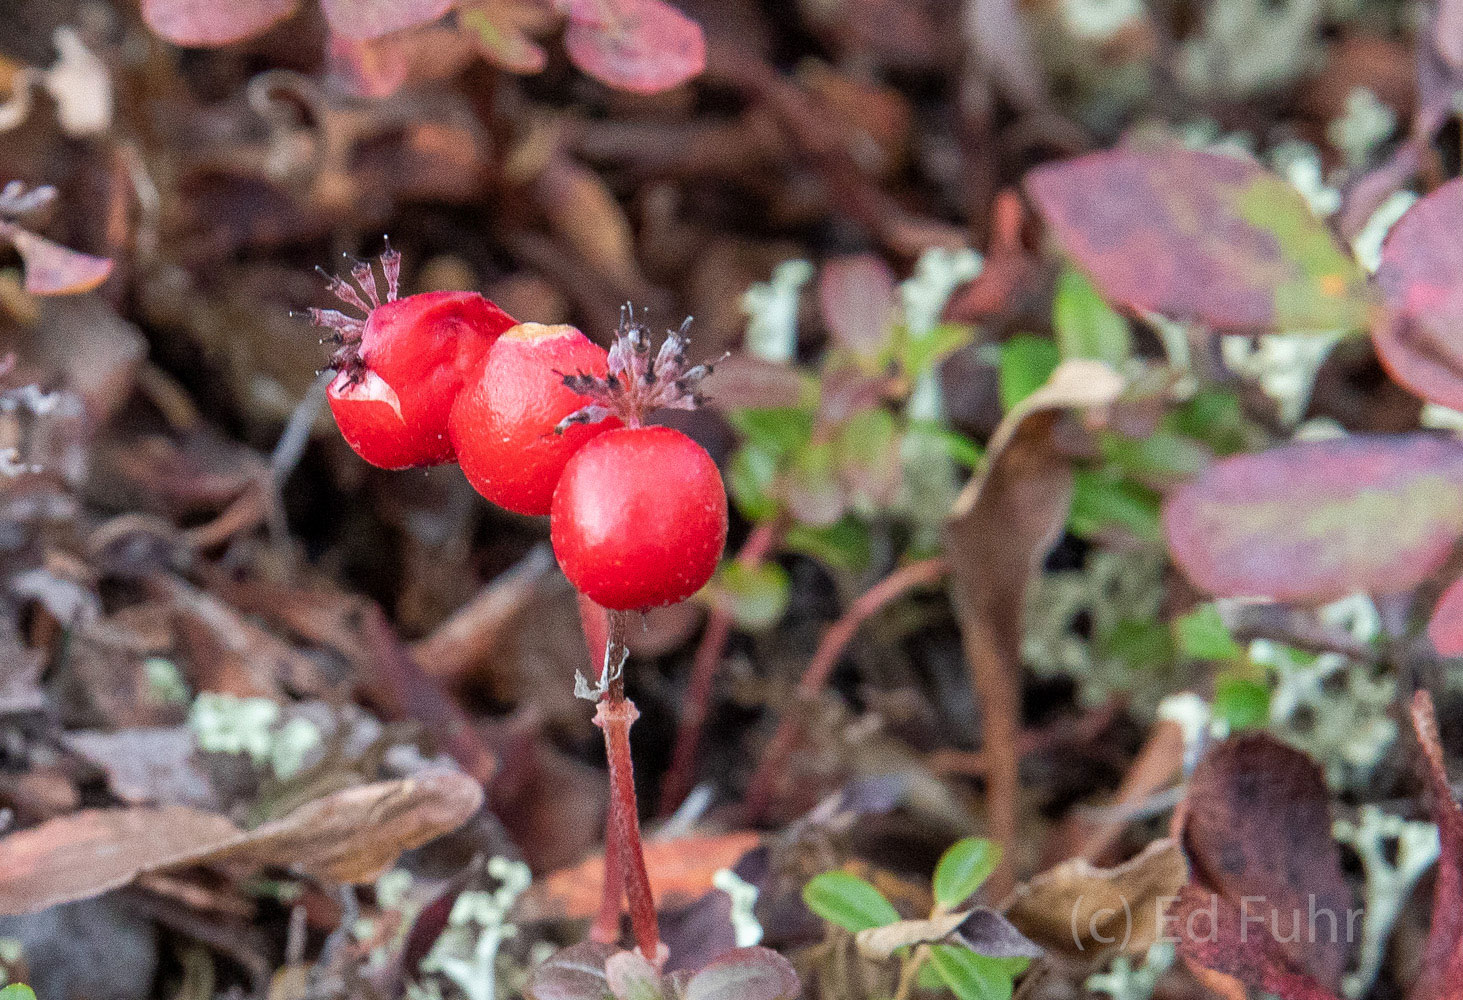 Cranberries and soap berry can be found across the Denali tundra.